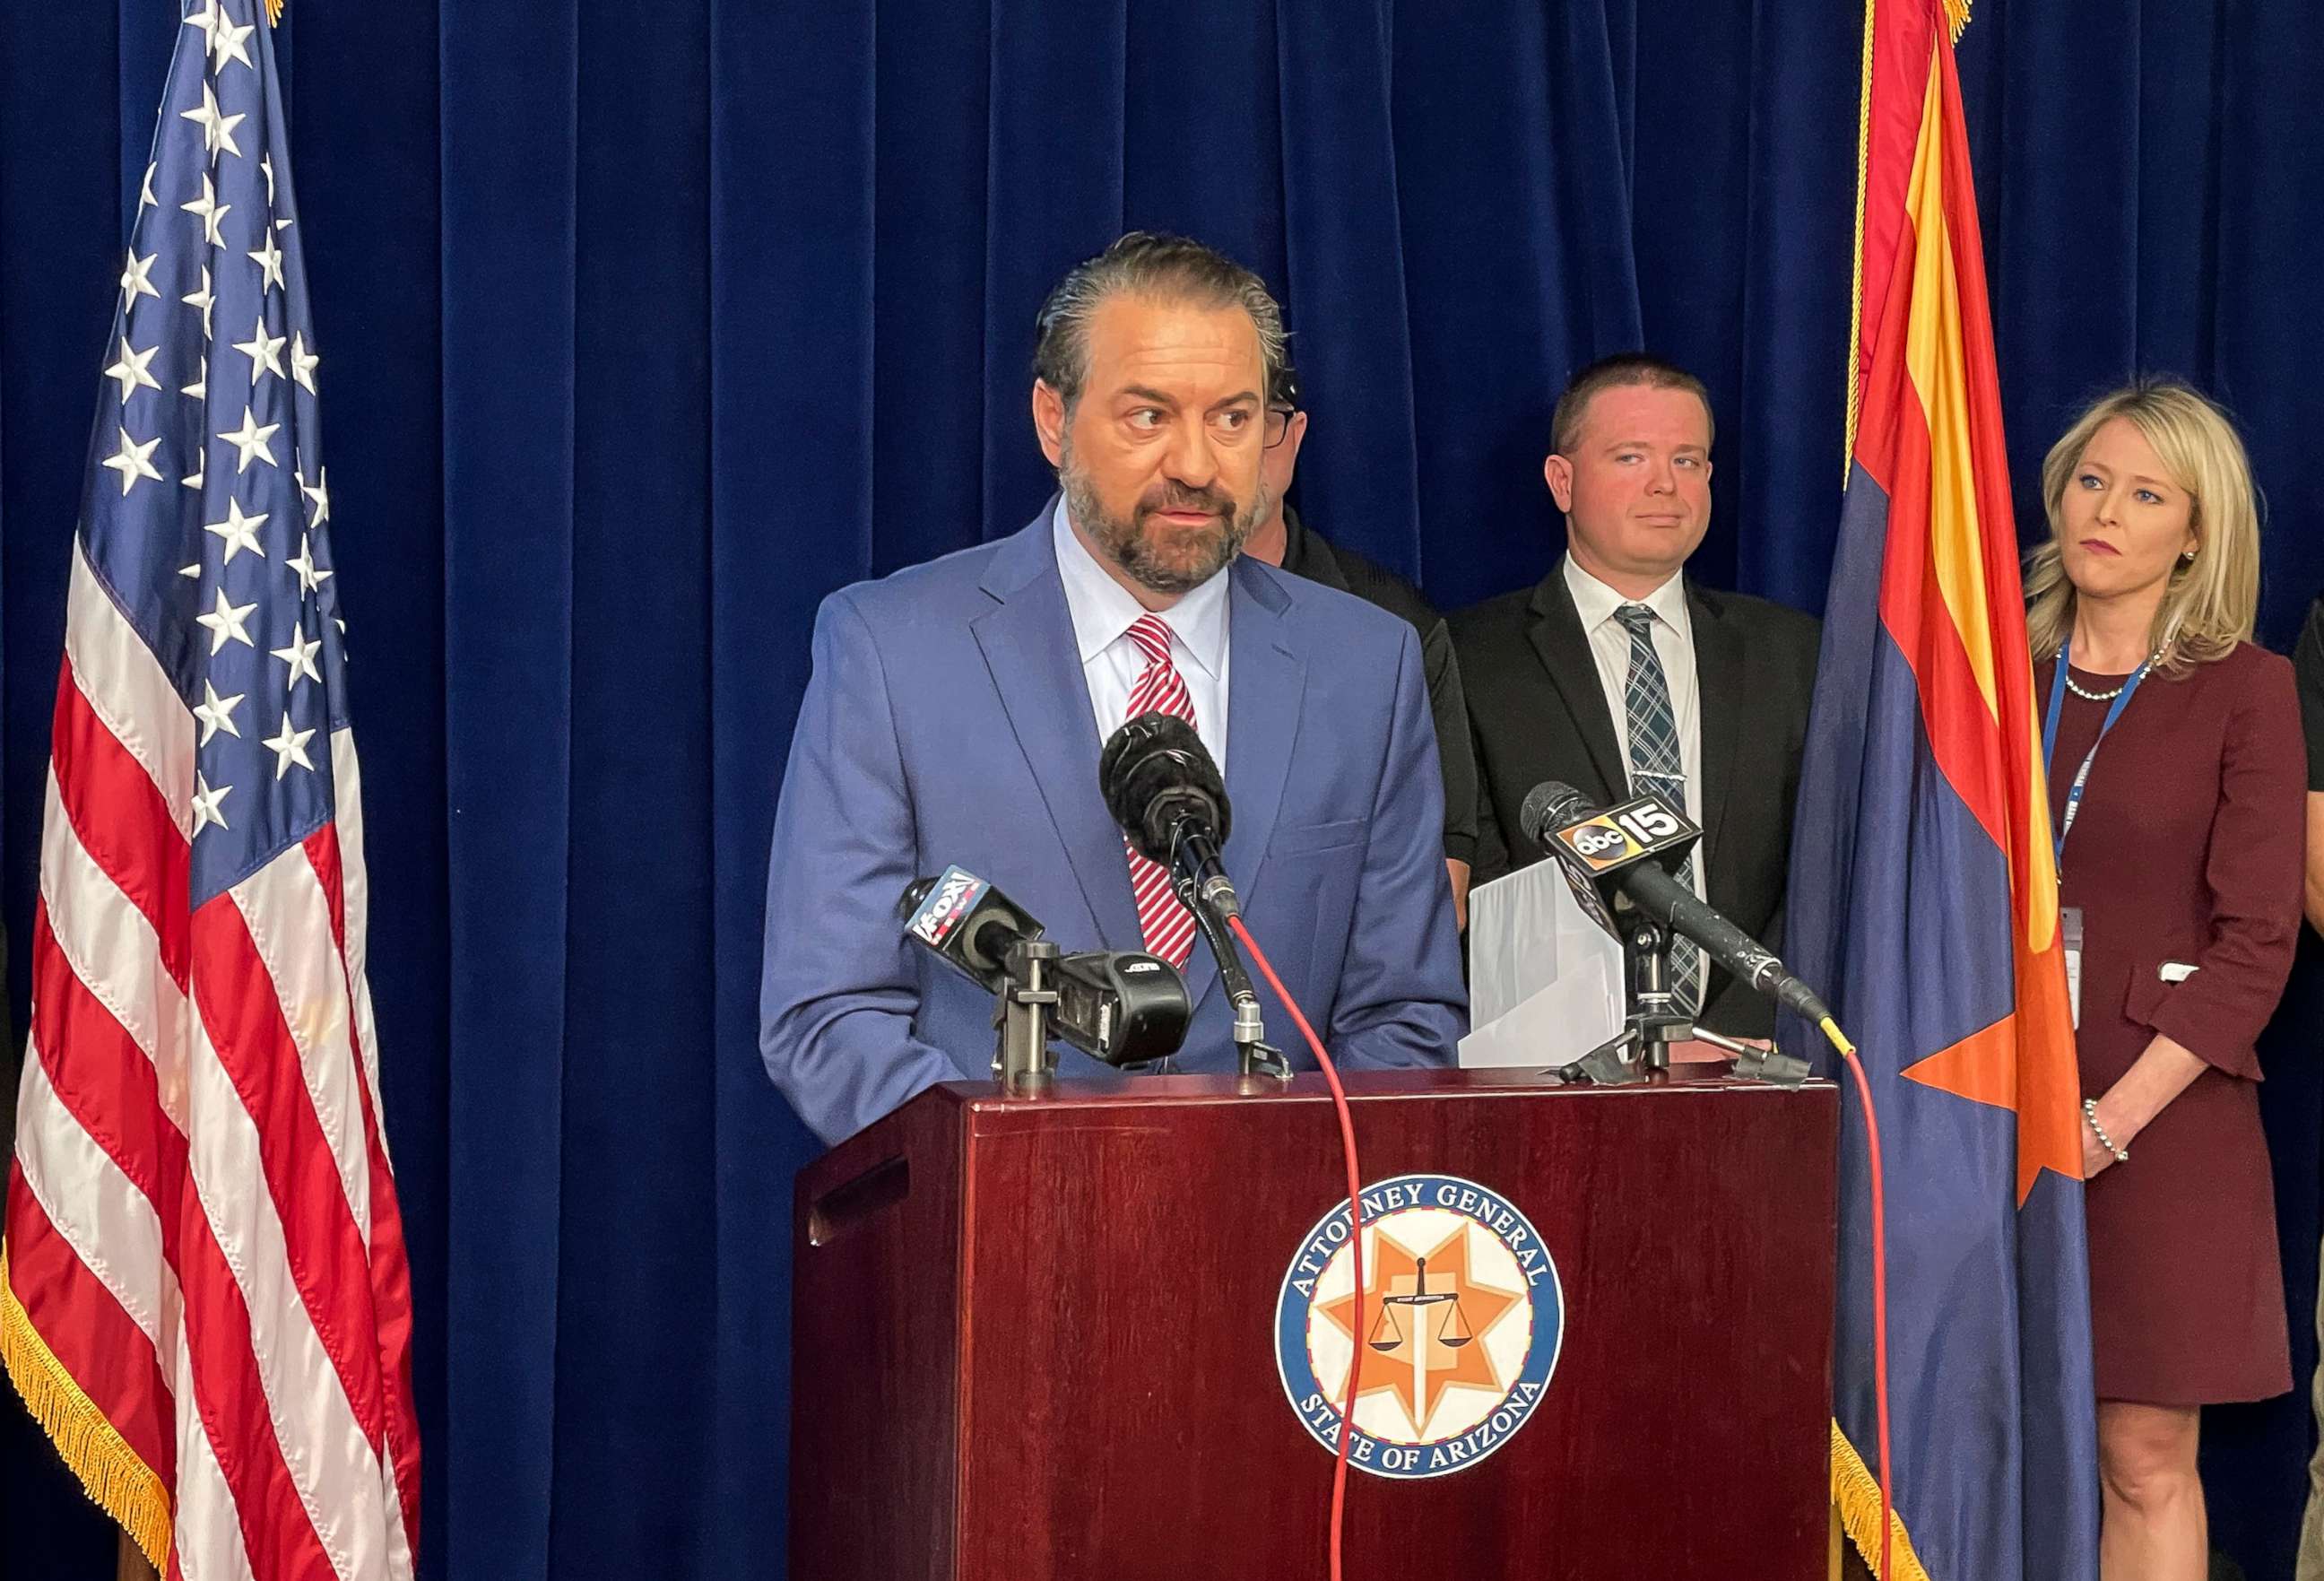 PHOTO: In this Nov. 22, 2021, file photo, Arizona Attorney General Mark Brnovich speaks to reporters during a news conference at his office in Phoenix.